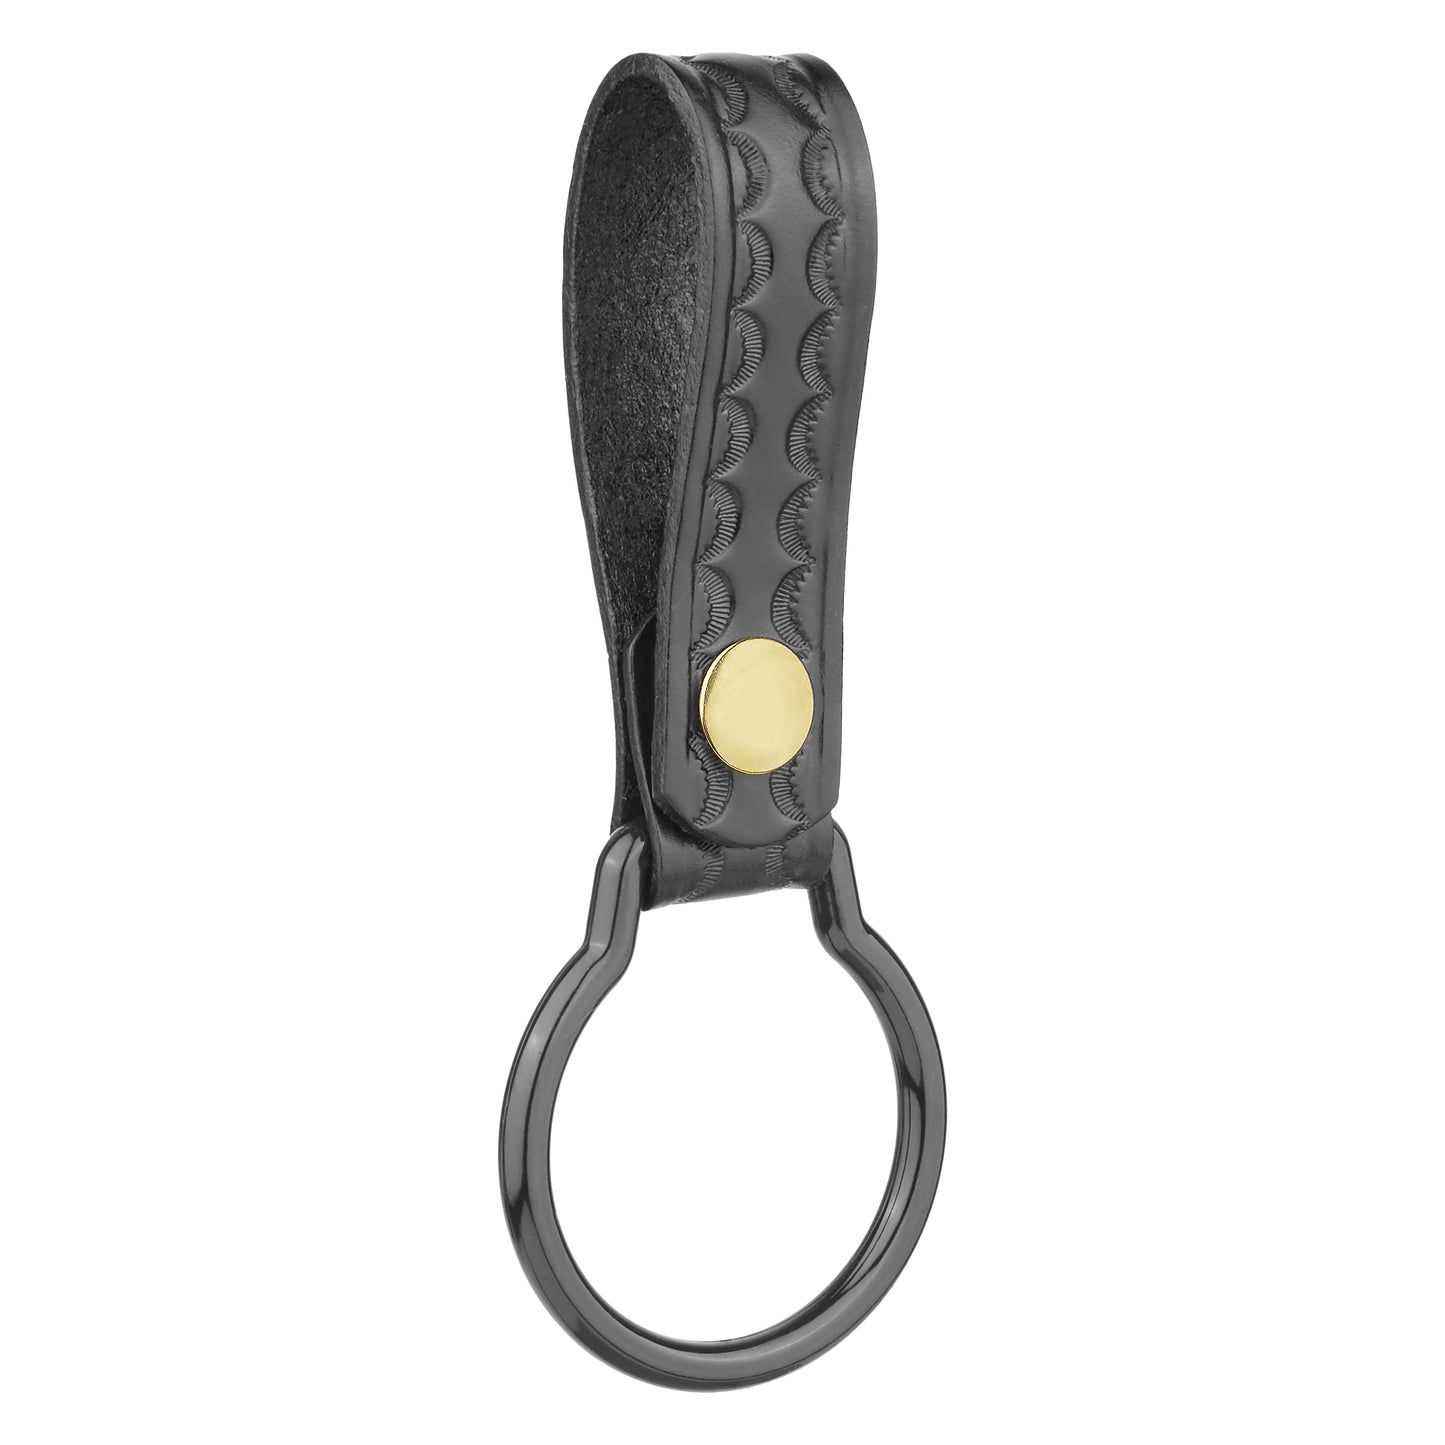 Basketweave Leather D Cell Flashlight Strap